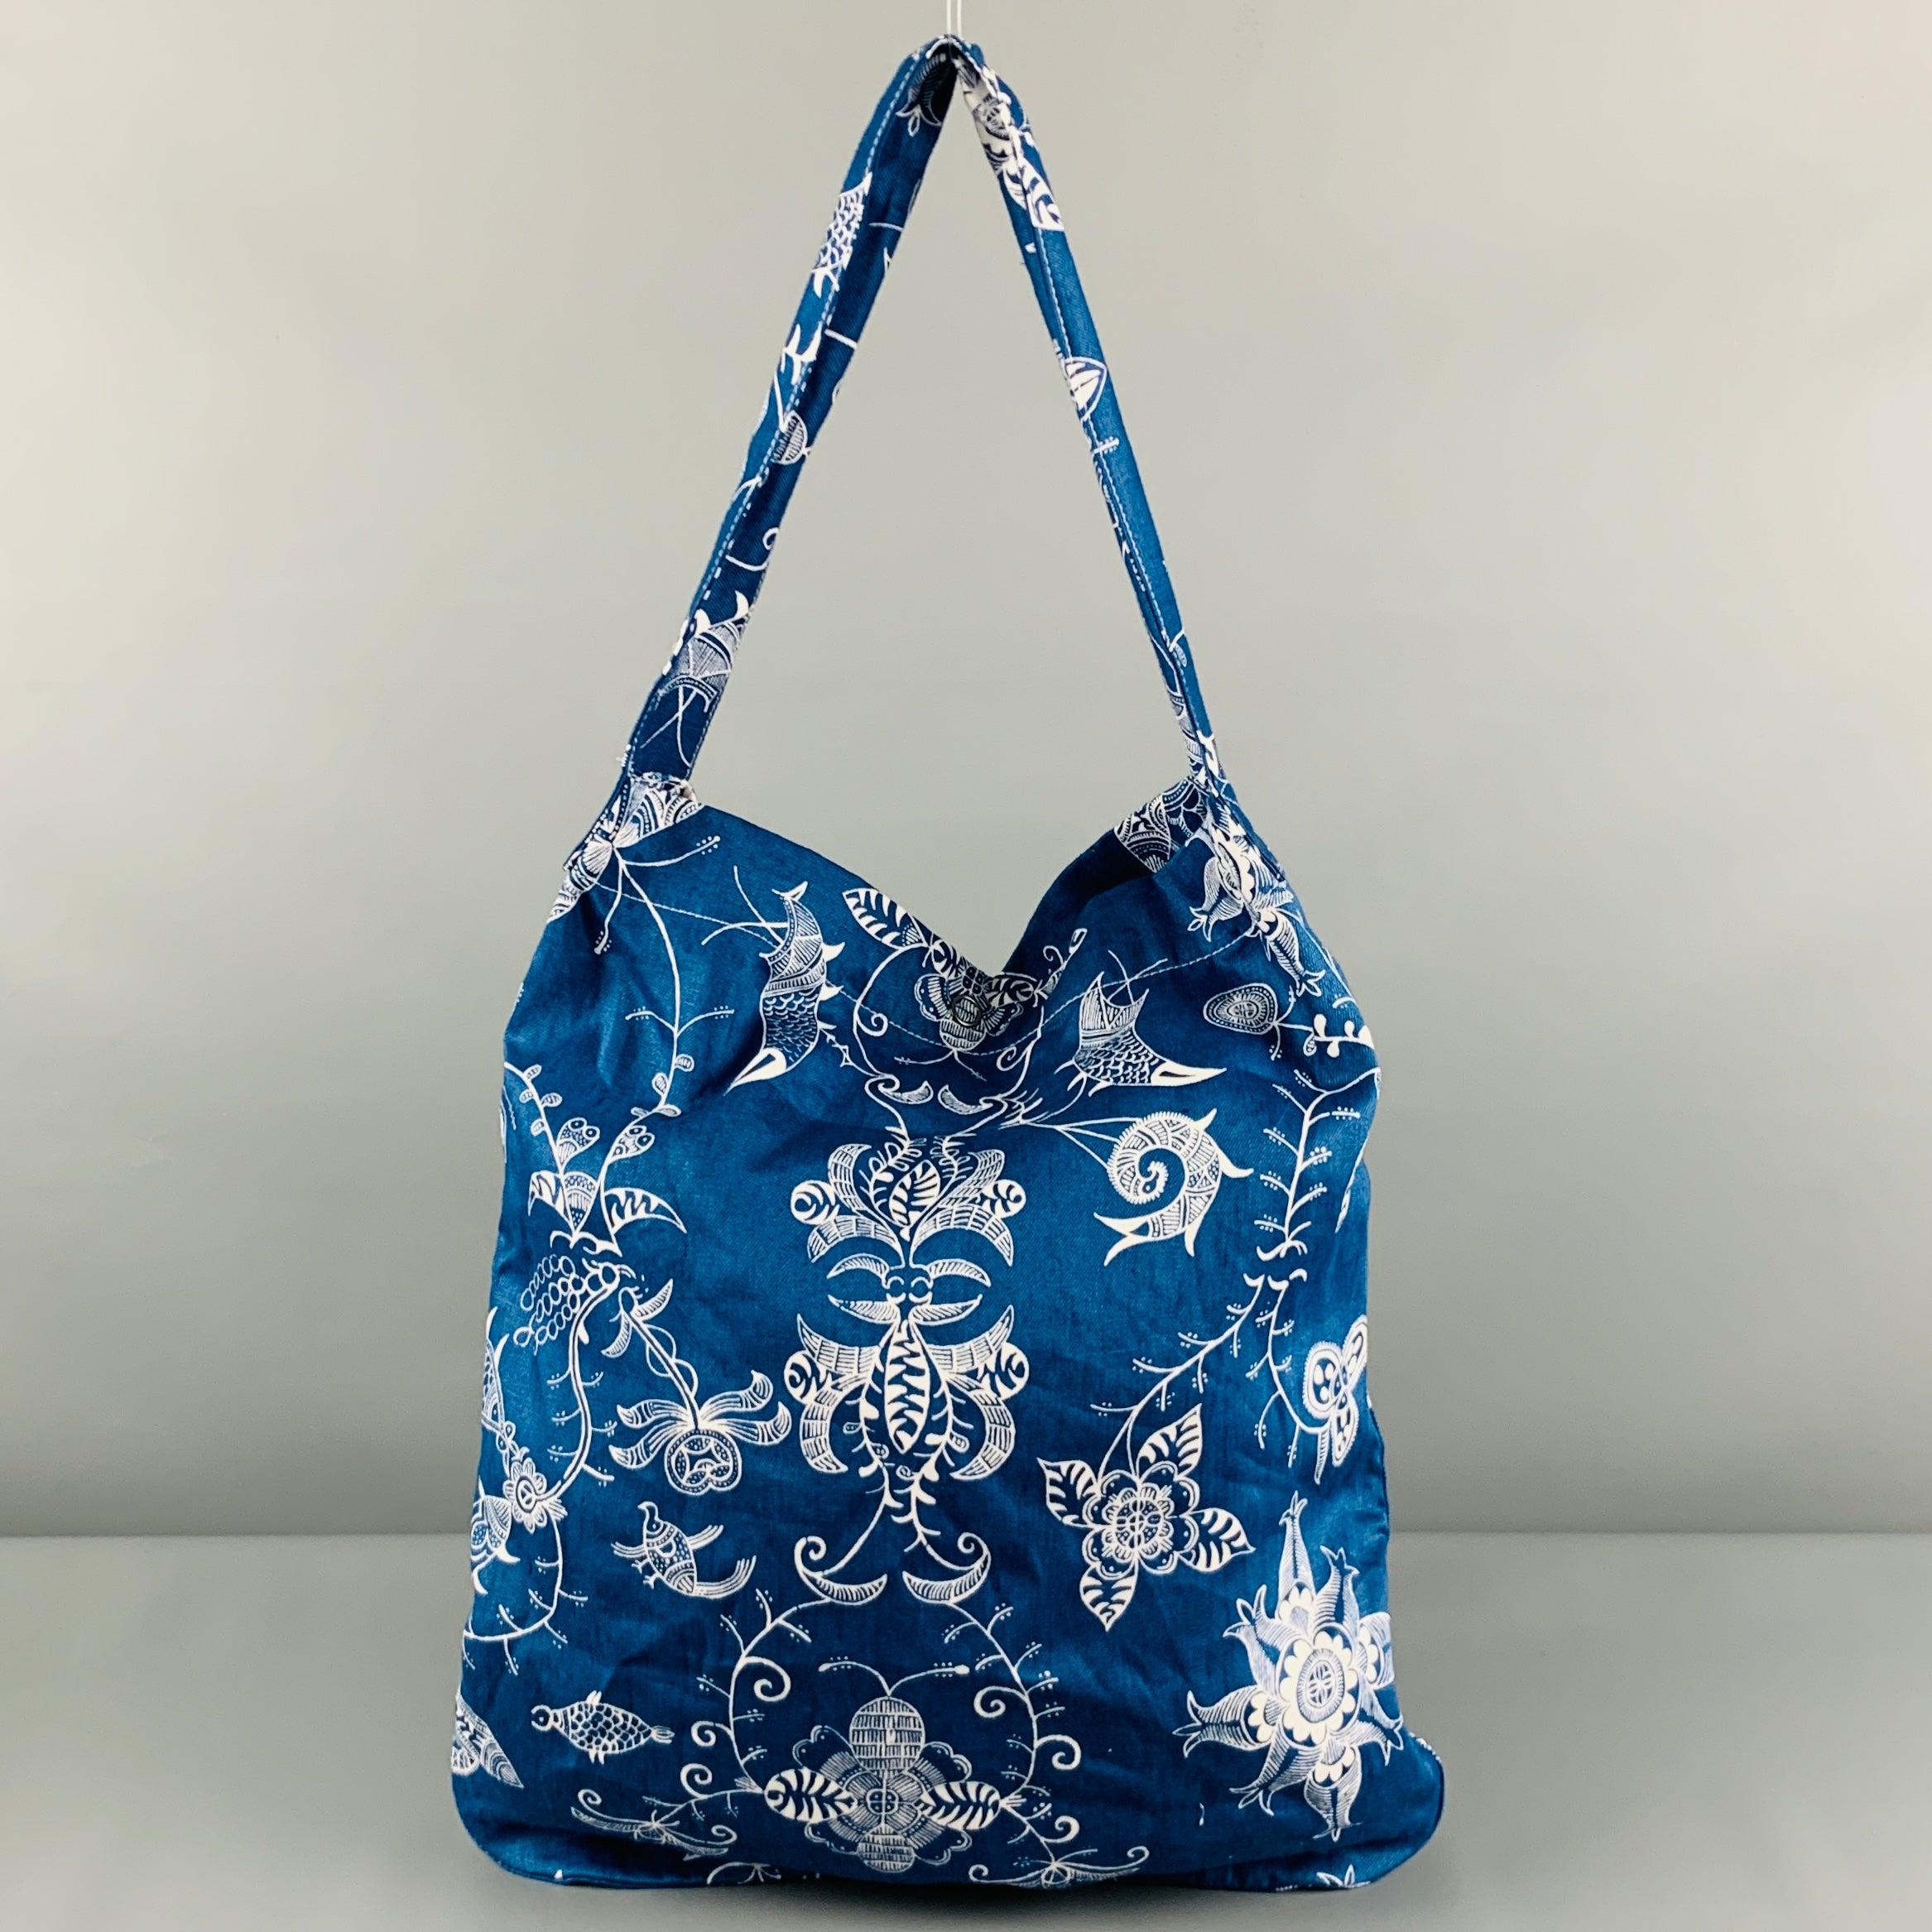 JUNYA WATANABE Blue White Abstract Floral Linen Tote Bag In Good Condition For Sale In San Francisco, CA